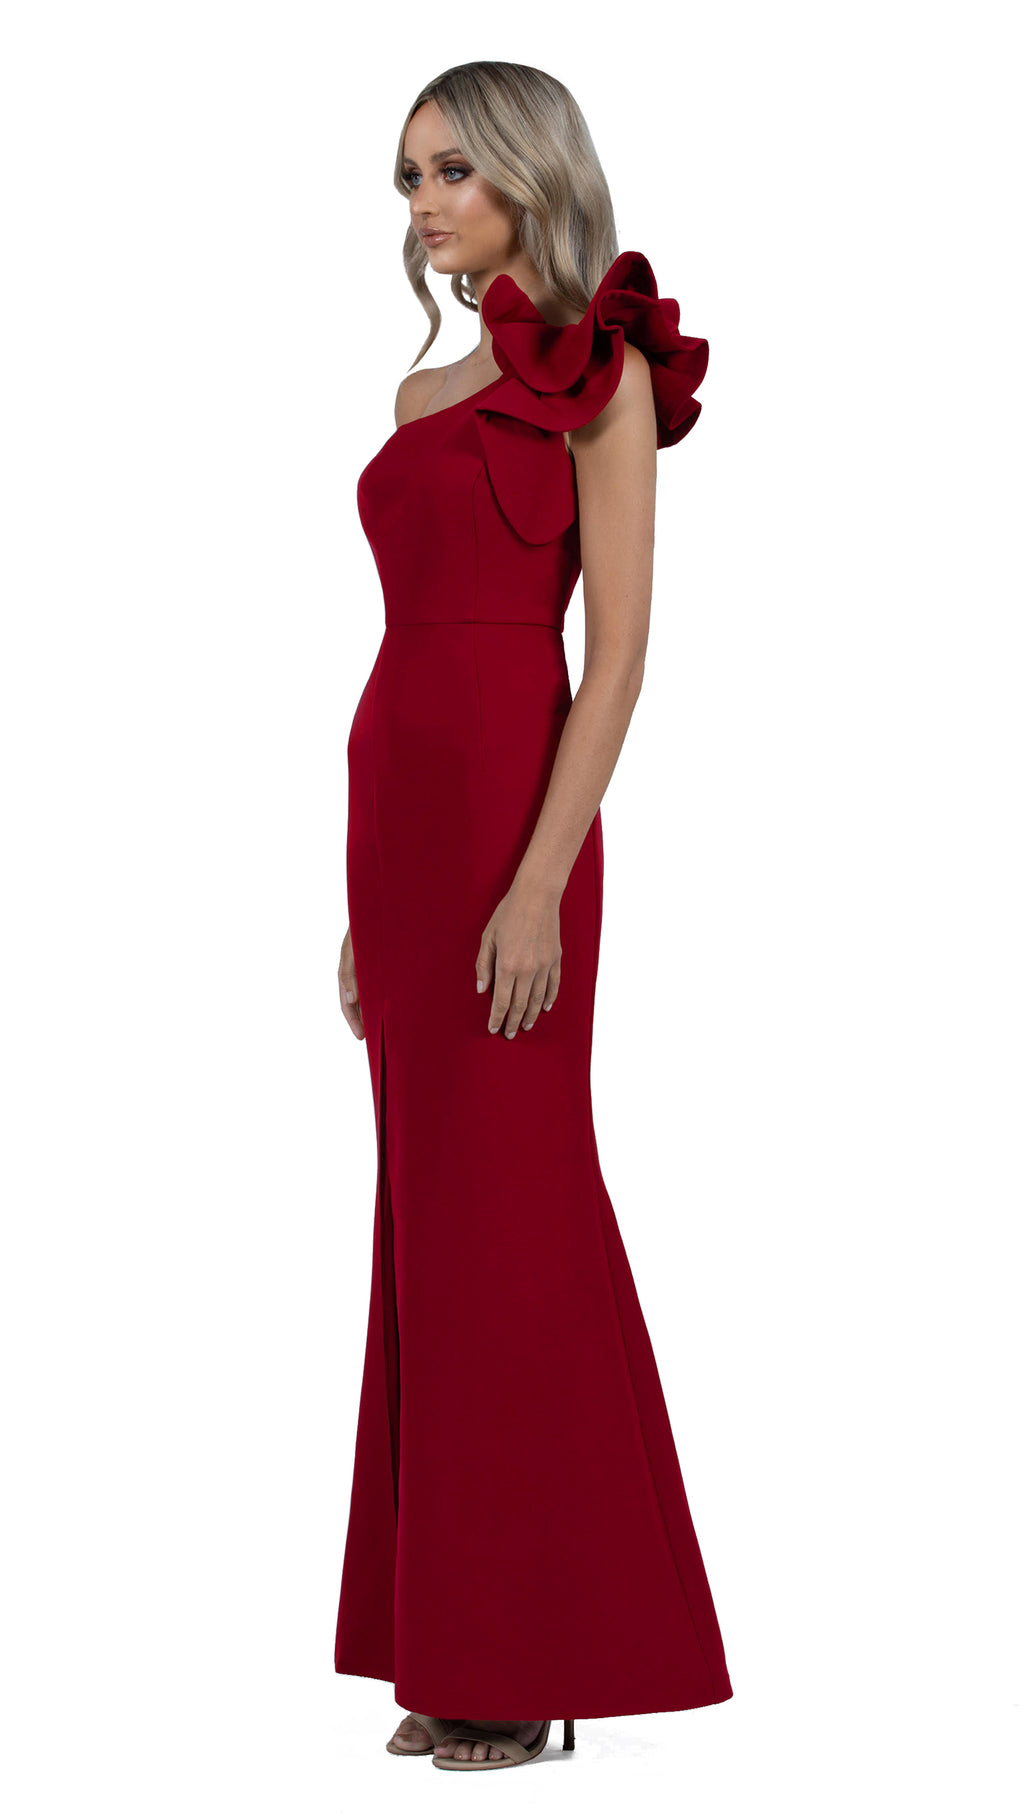 Sue Frill Gown in Burgundy SIDE